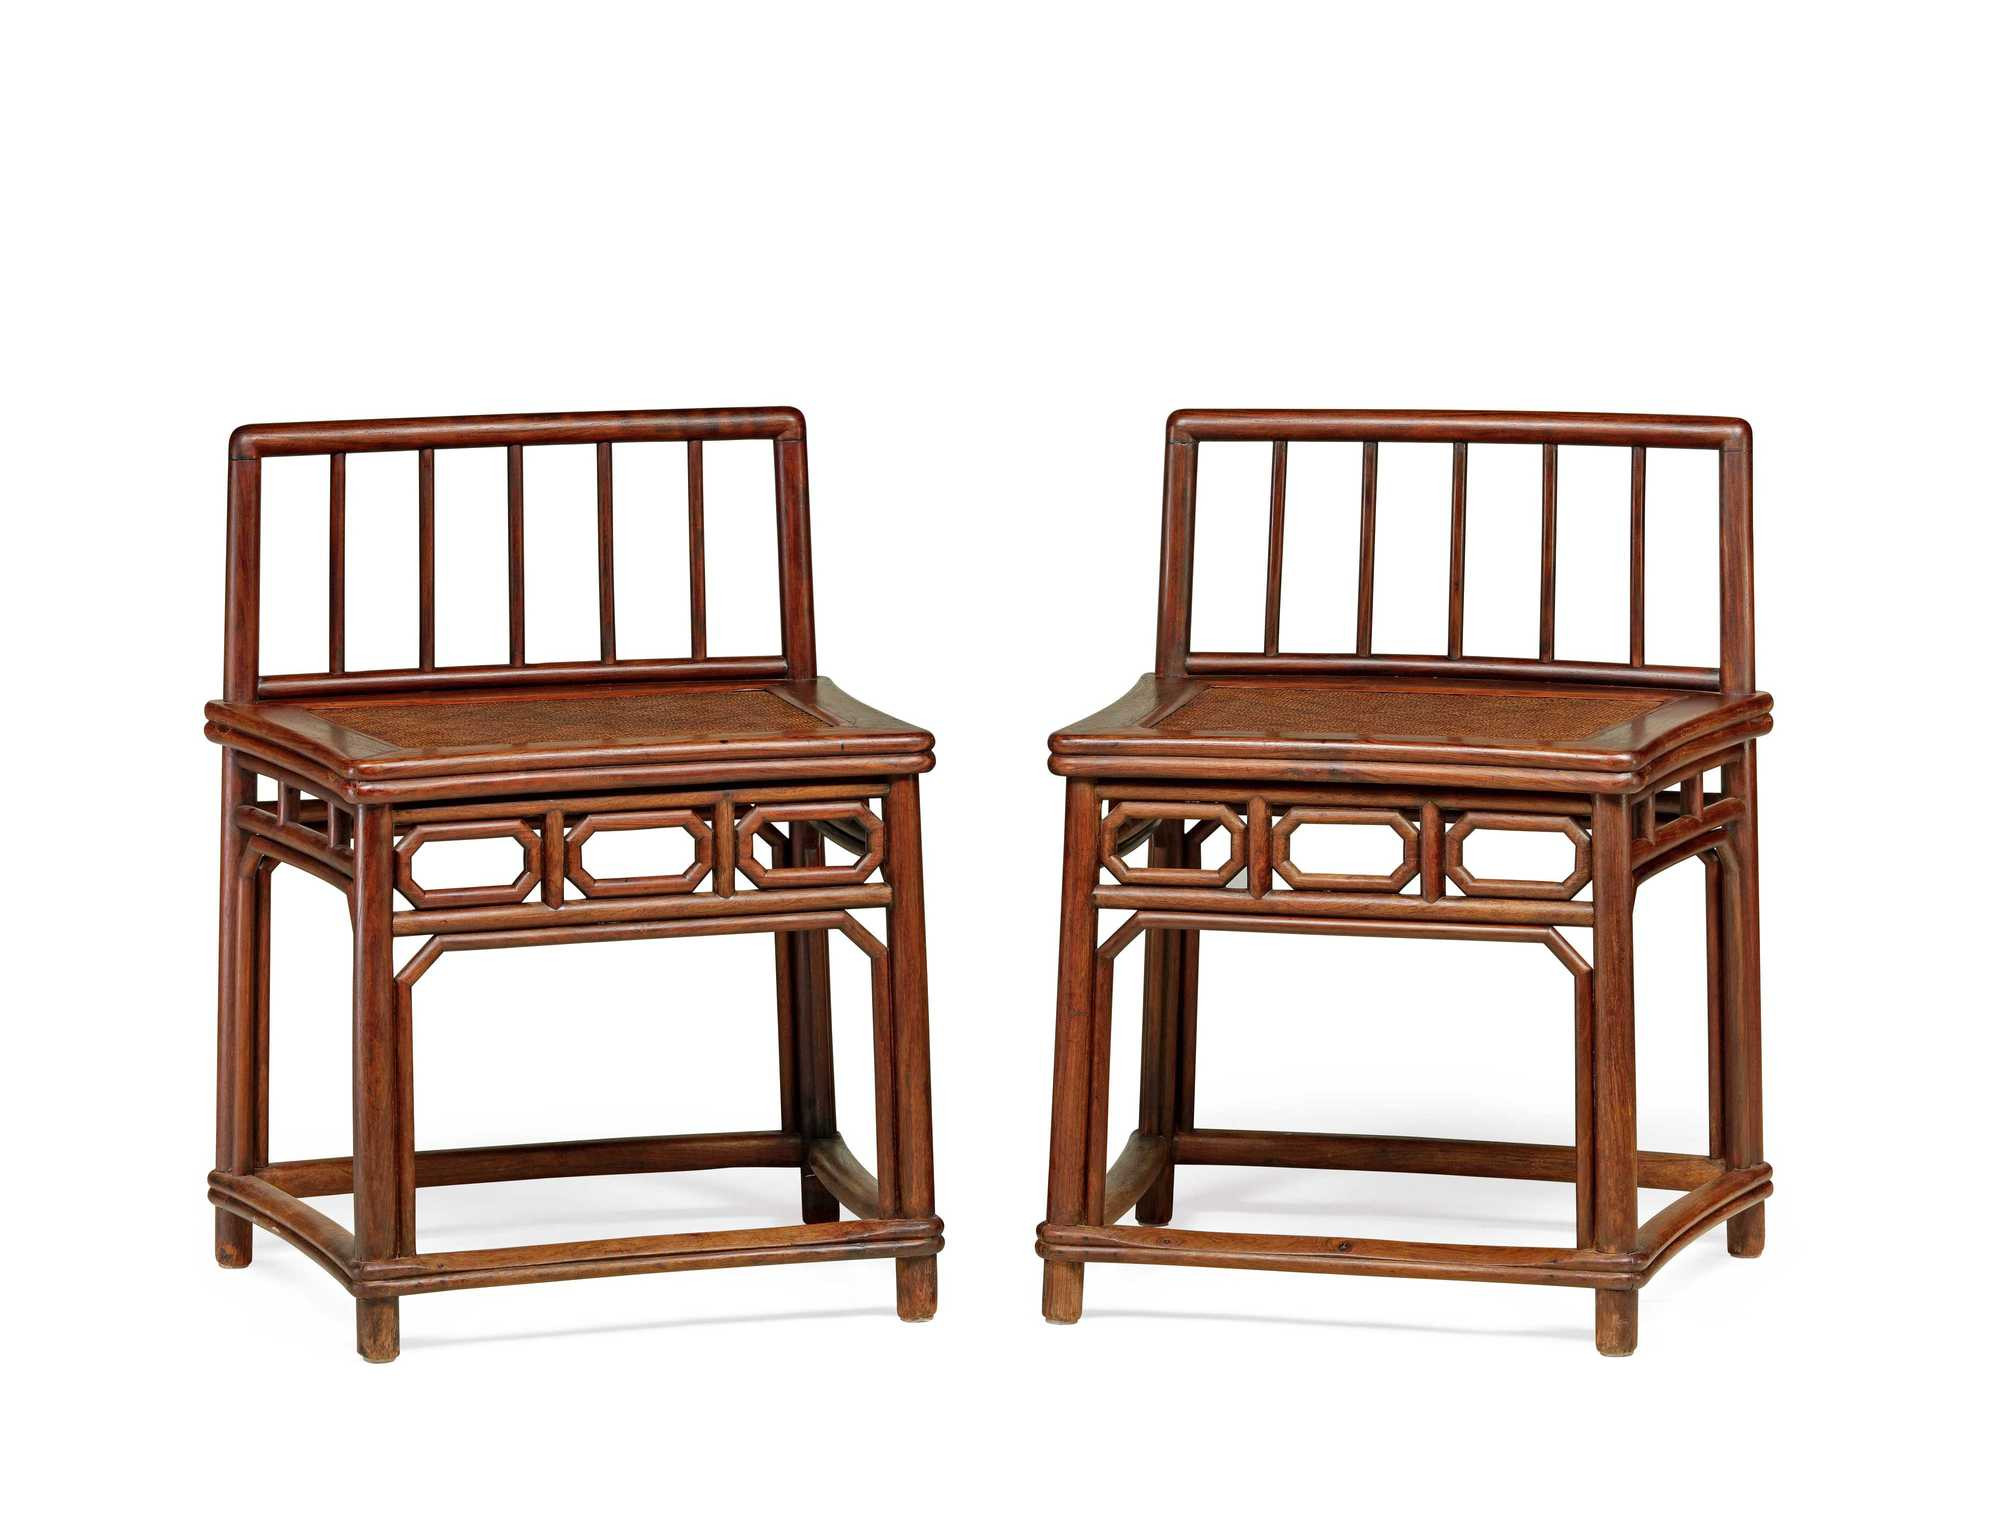 PAIR OF HUANGHUALI WOODEN CHAIRS WITH SHORT ARCHED BACK IN SECTORIAL COMB-SHAPED